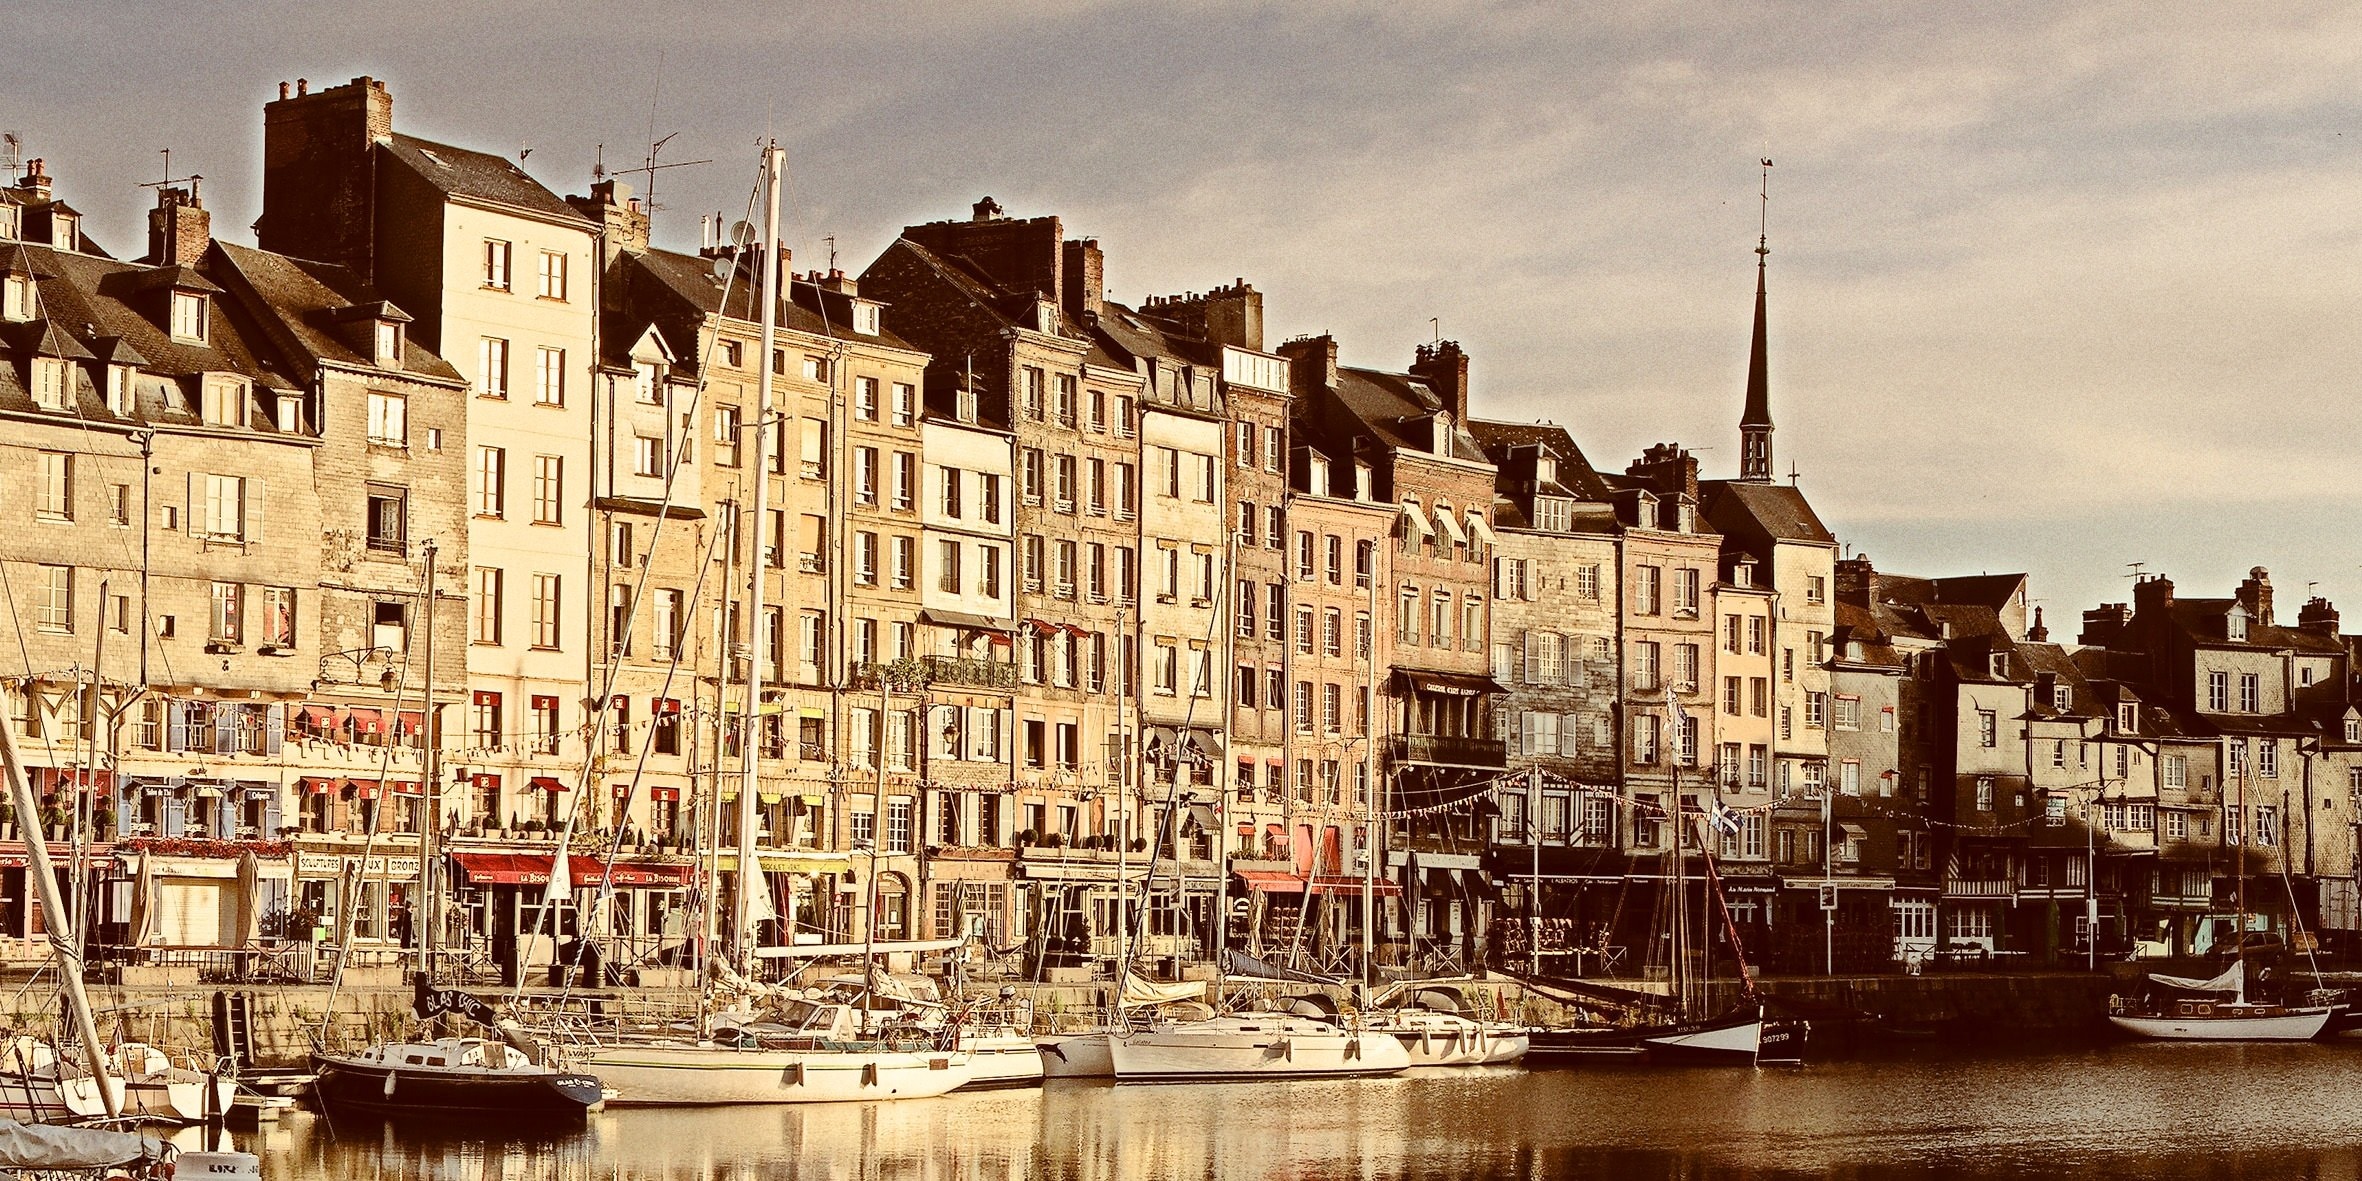 Sea, Normandy, Honfleur, France, Holiday, building exterior, architecture